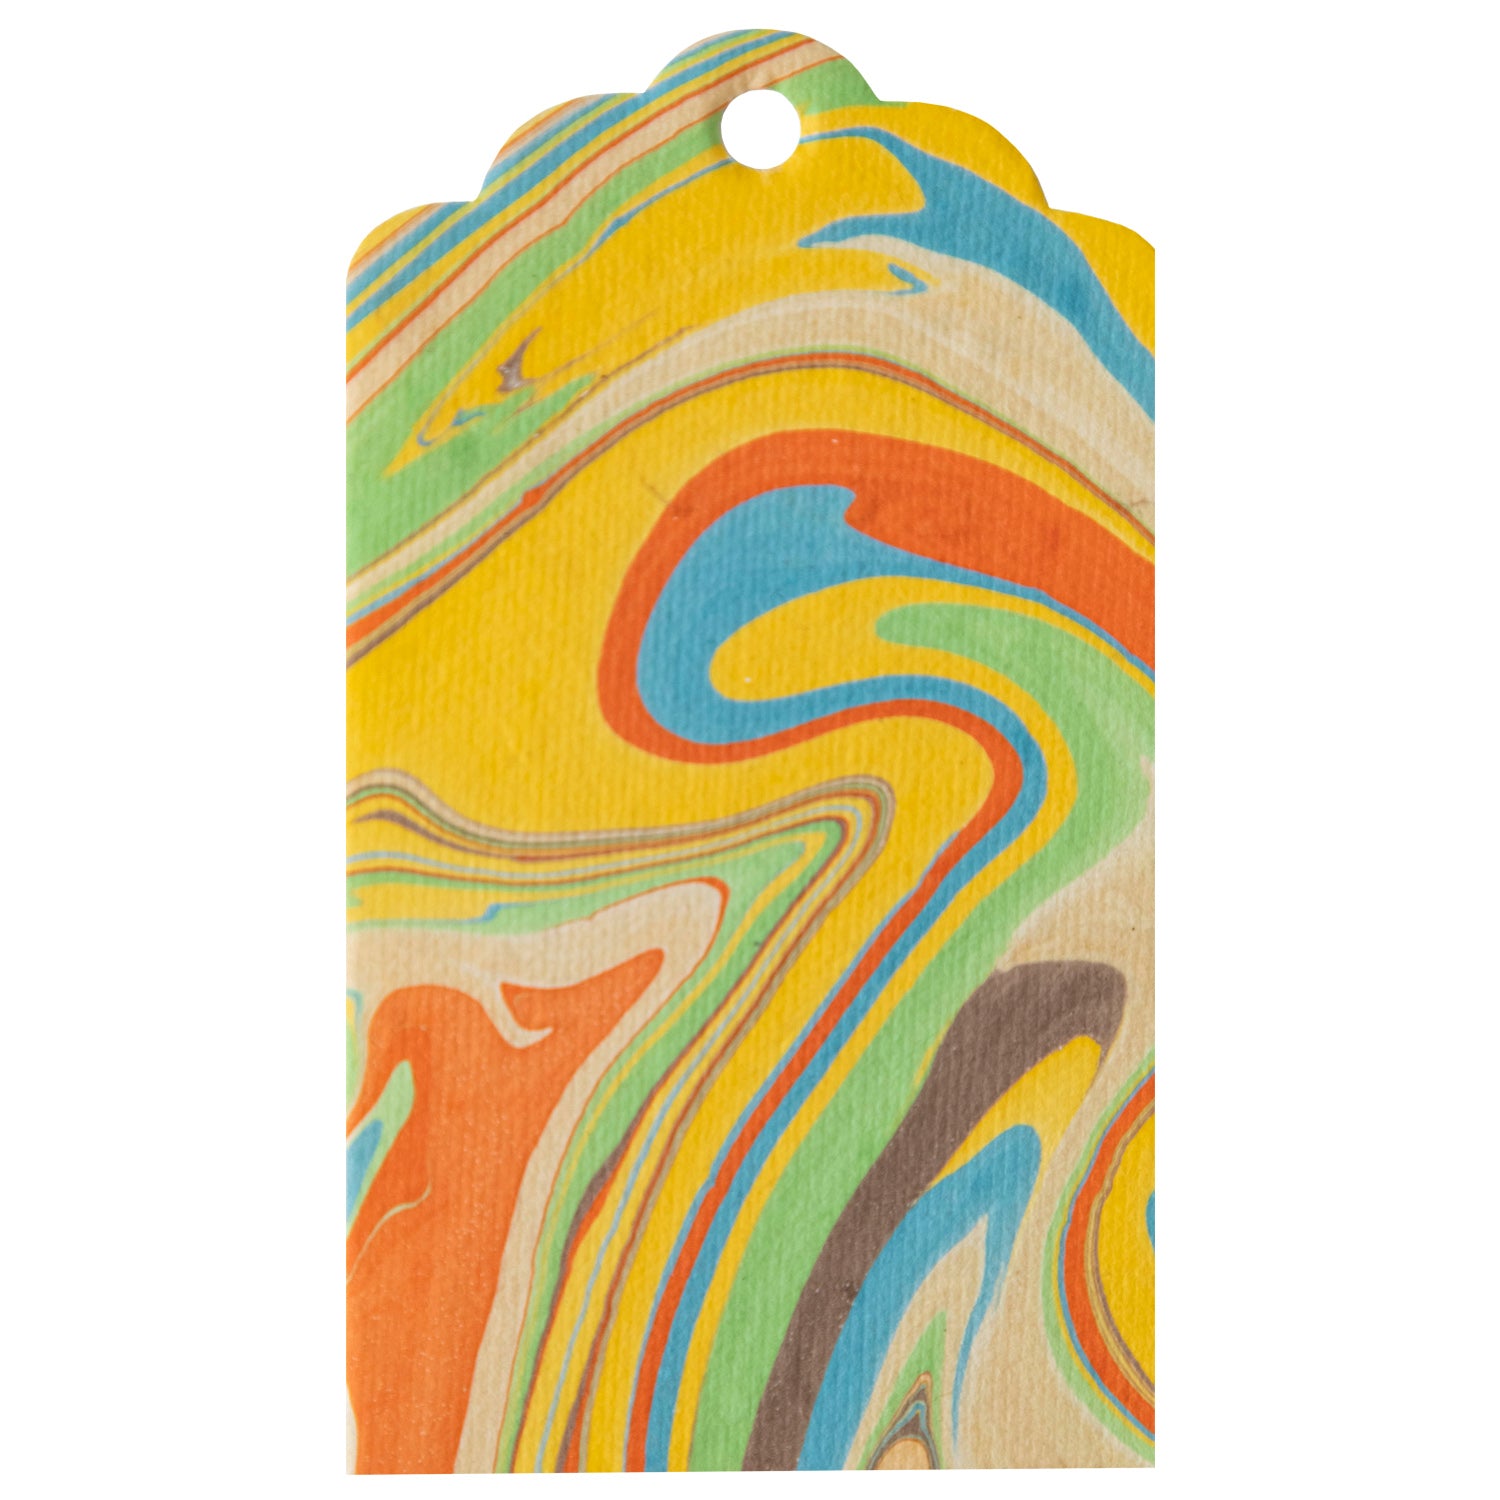 A unique Multi Color Marbled Gift Tag from Hester &amp; Cook on a white background made from handmade papers.